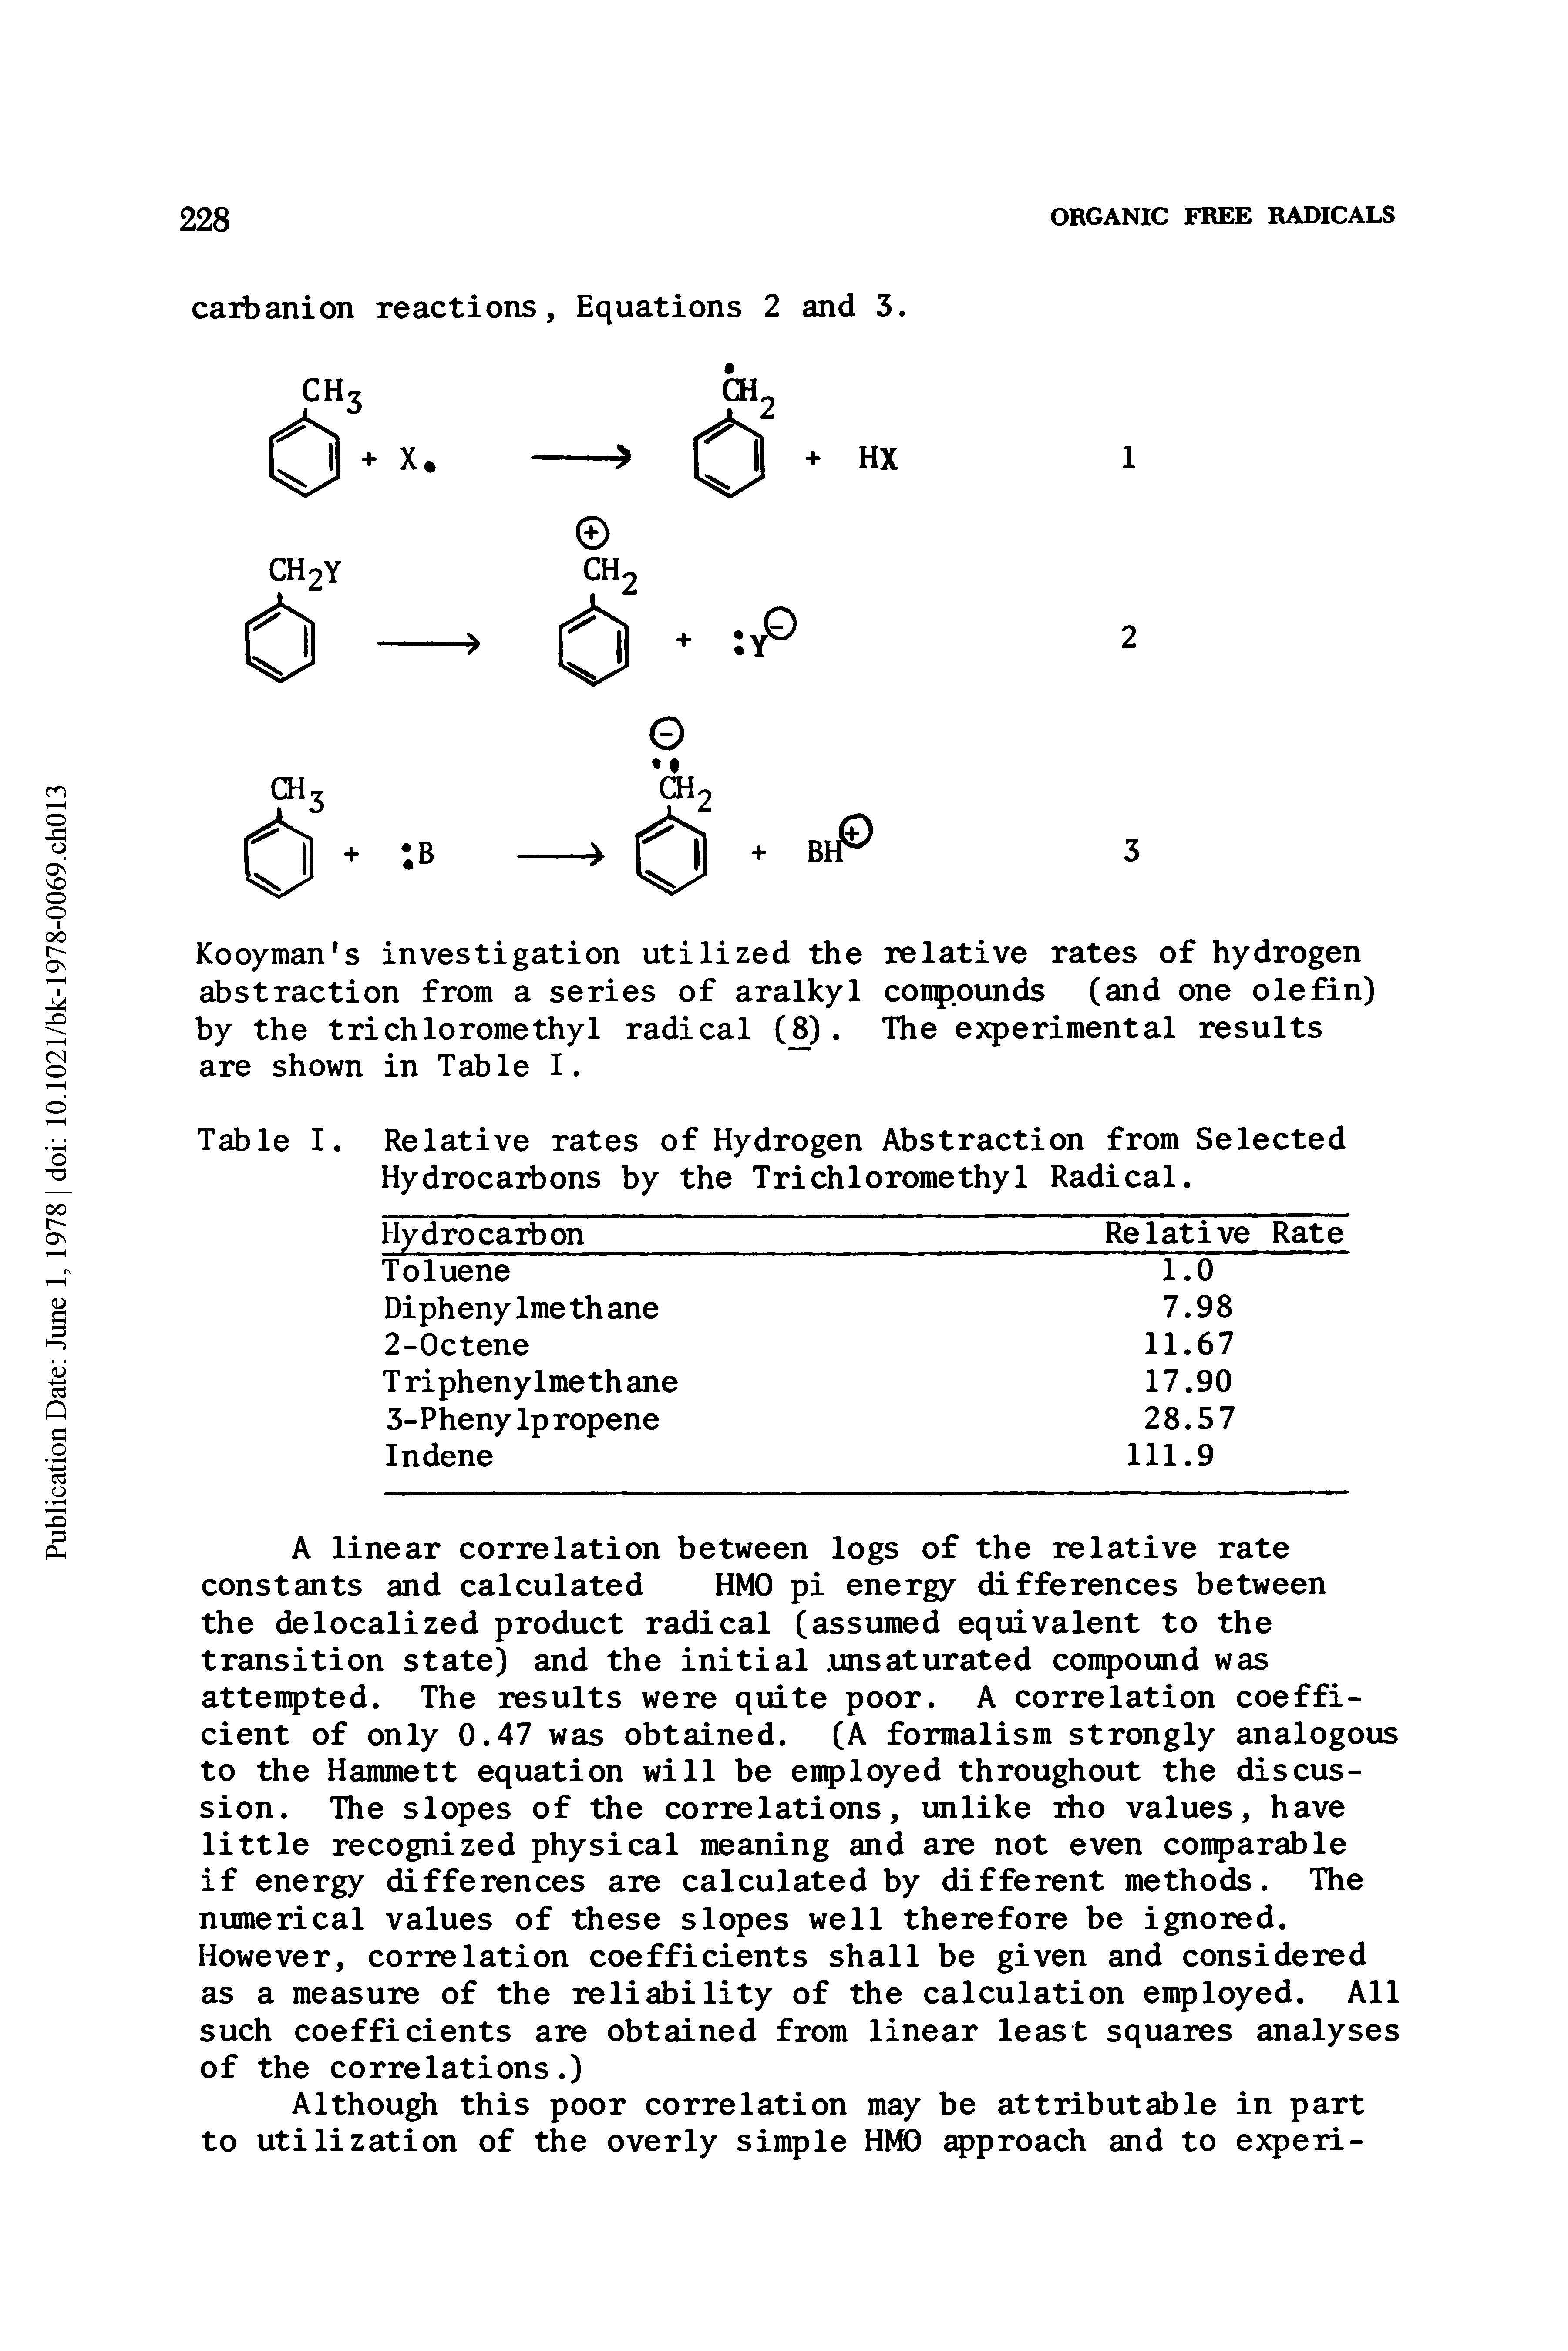 Table I. Relative rates of Hydrogen Abstraction from Selected Hydrocarbons by the Trichloromethyl Radical.